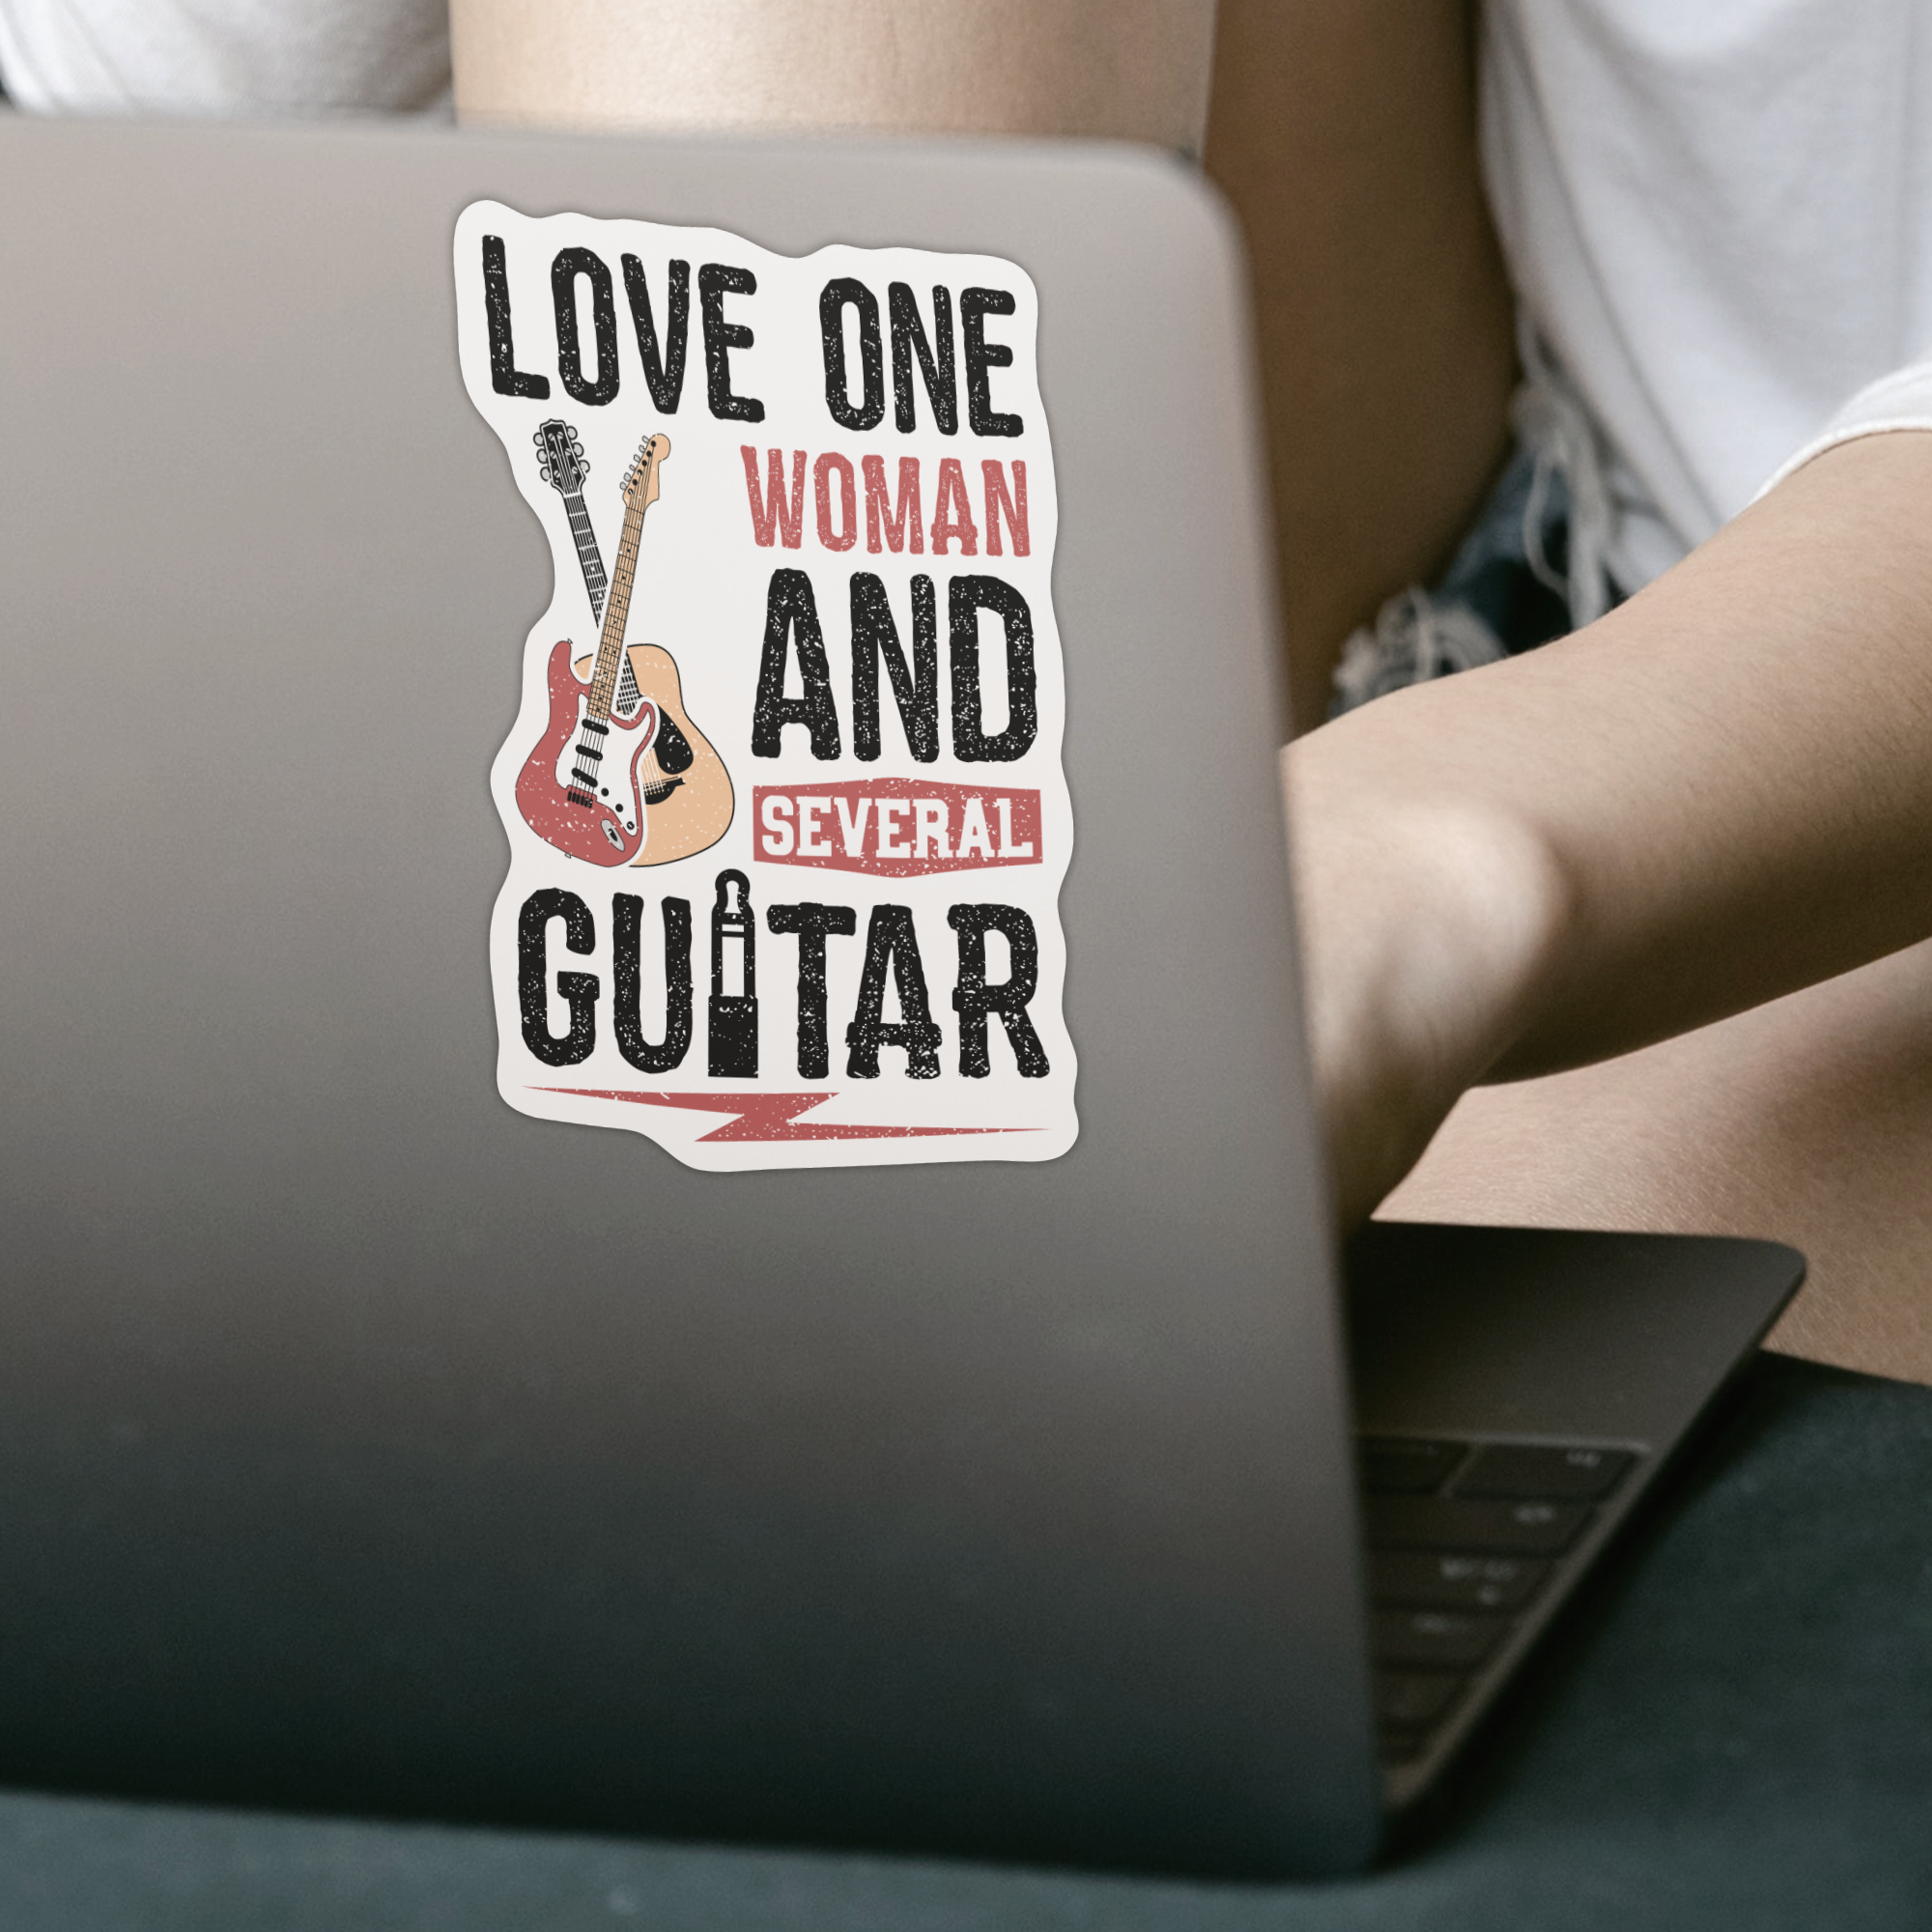 Love One Woman And Several Guitars Sticker - DESIGNSBYJNK5.COM